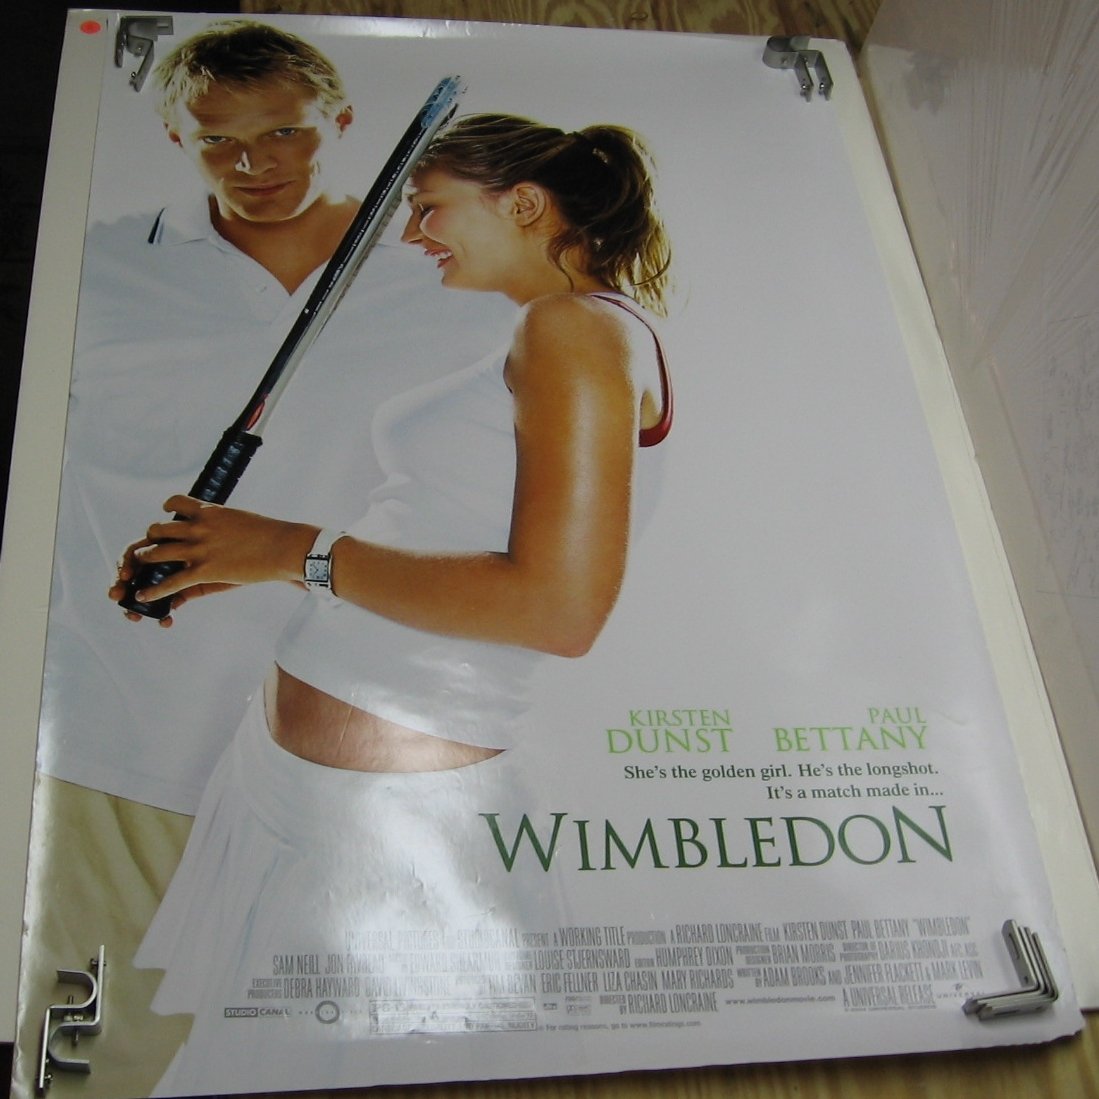 WIMBLEDON Authentic Movie Poster - Double Sided - Kirsten Dunst, Paul Bettay - 2004